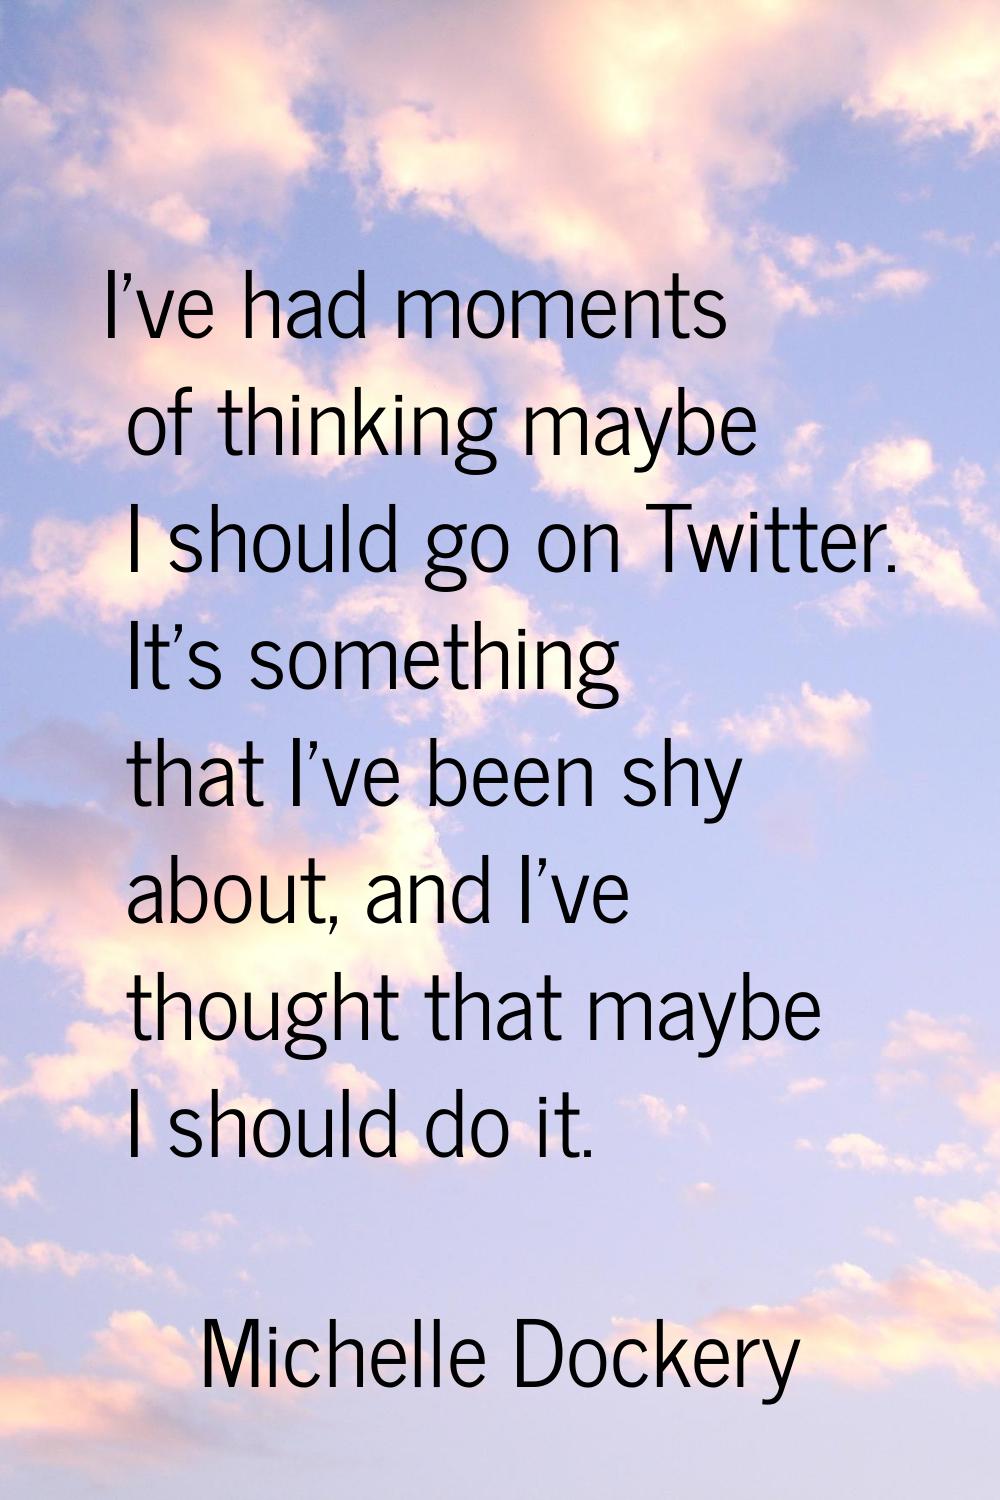 I've had moments of thinking maybe I should go on Twitter. It's something that I've been shy about,